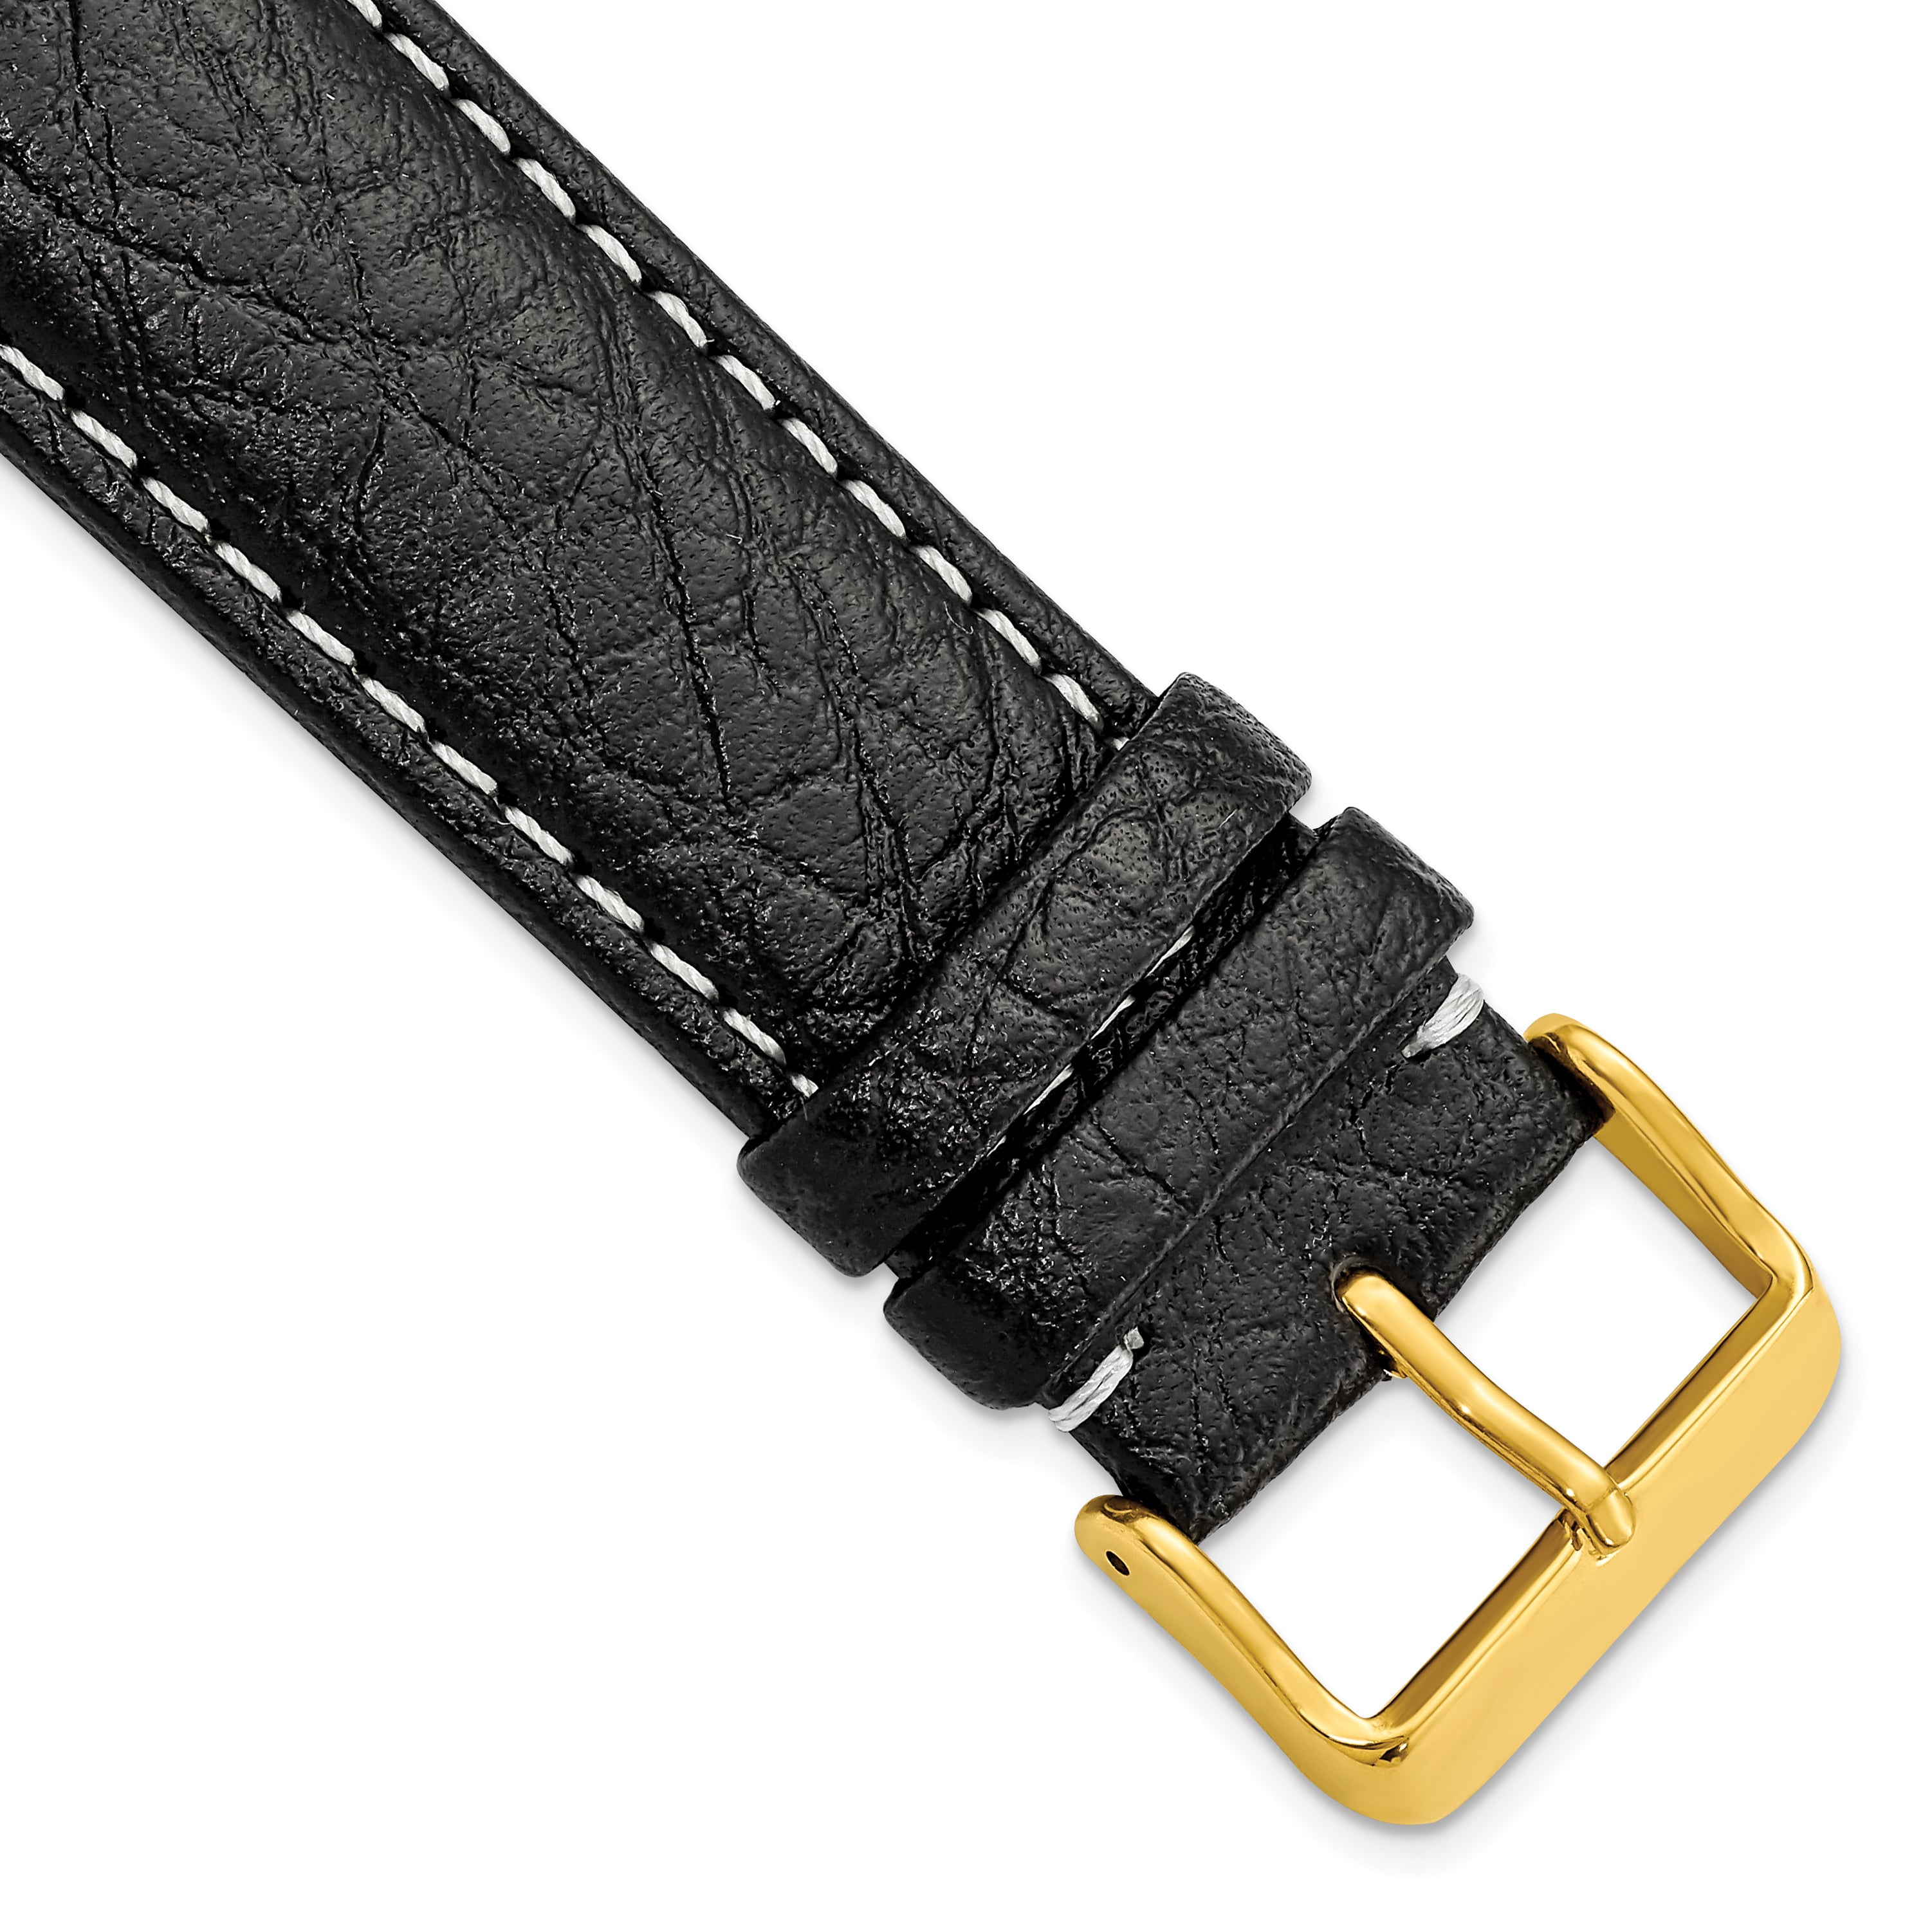 DeBeer 24mm Black Sport Leather with White Stitching and Gold-tone Buckle 7.5 inch Watch Band